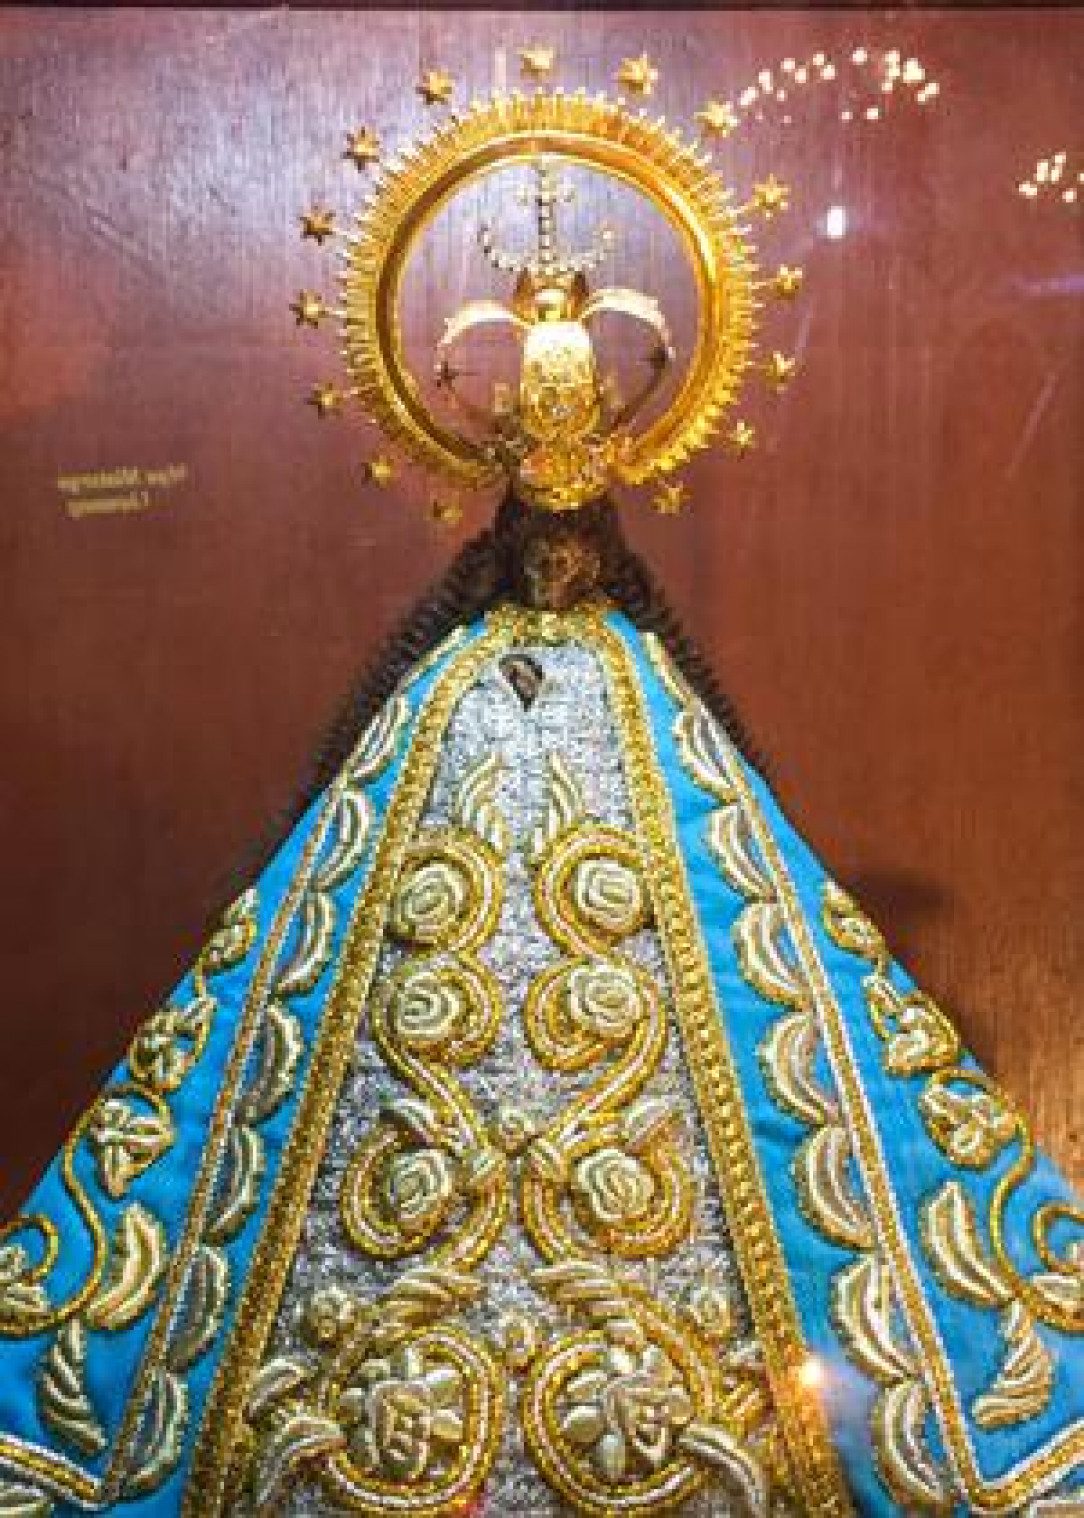 Our Lady of Caysasay is a statue of the Blessed Virgin Mary venerated at the Archdiocesan Shrine of Our Lady of Caysasay in Taal, Batangas in the Philippines